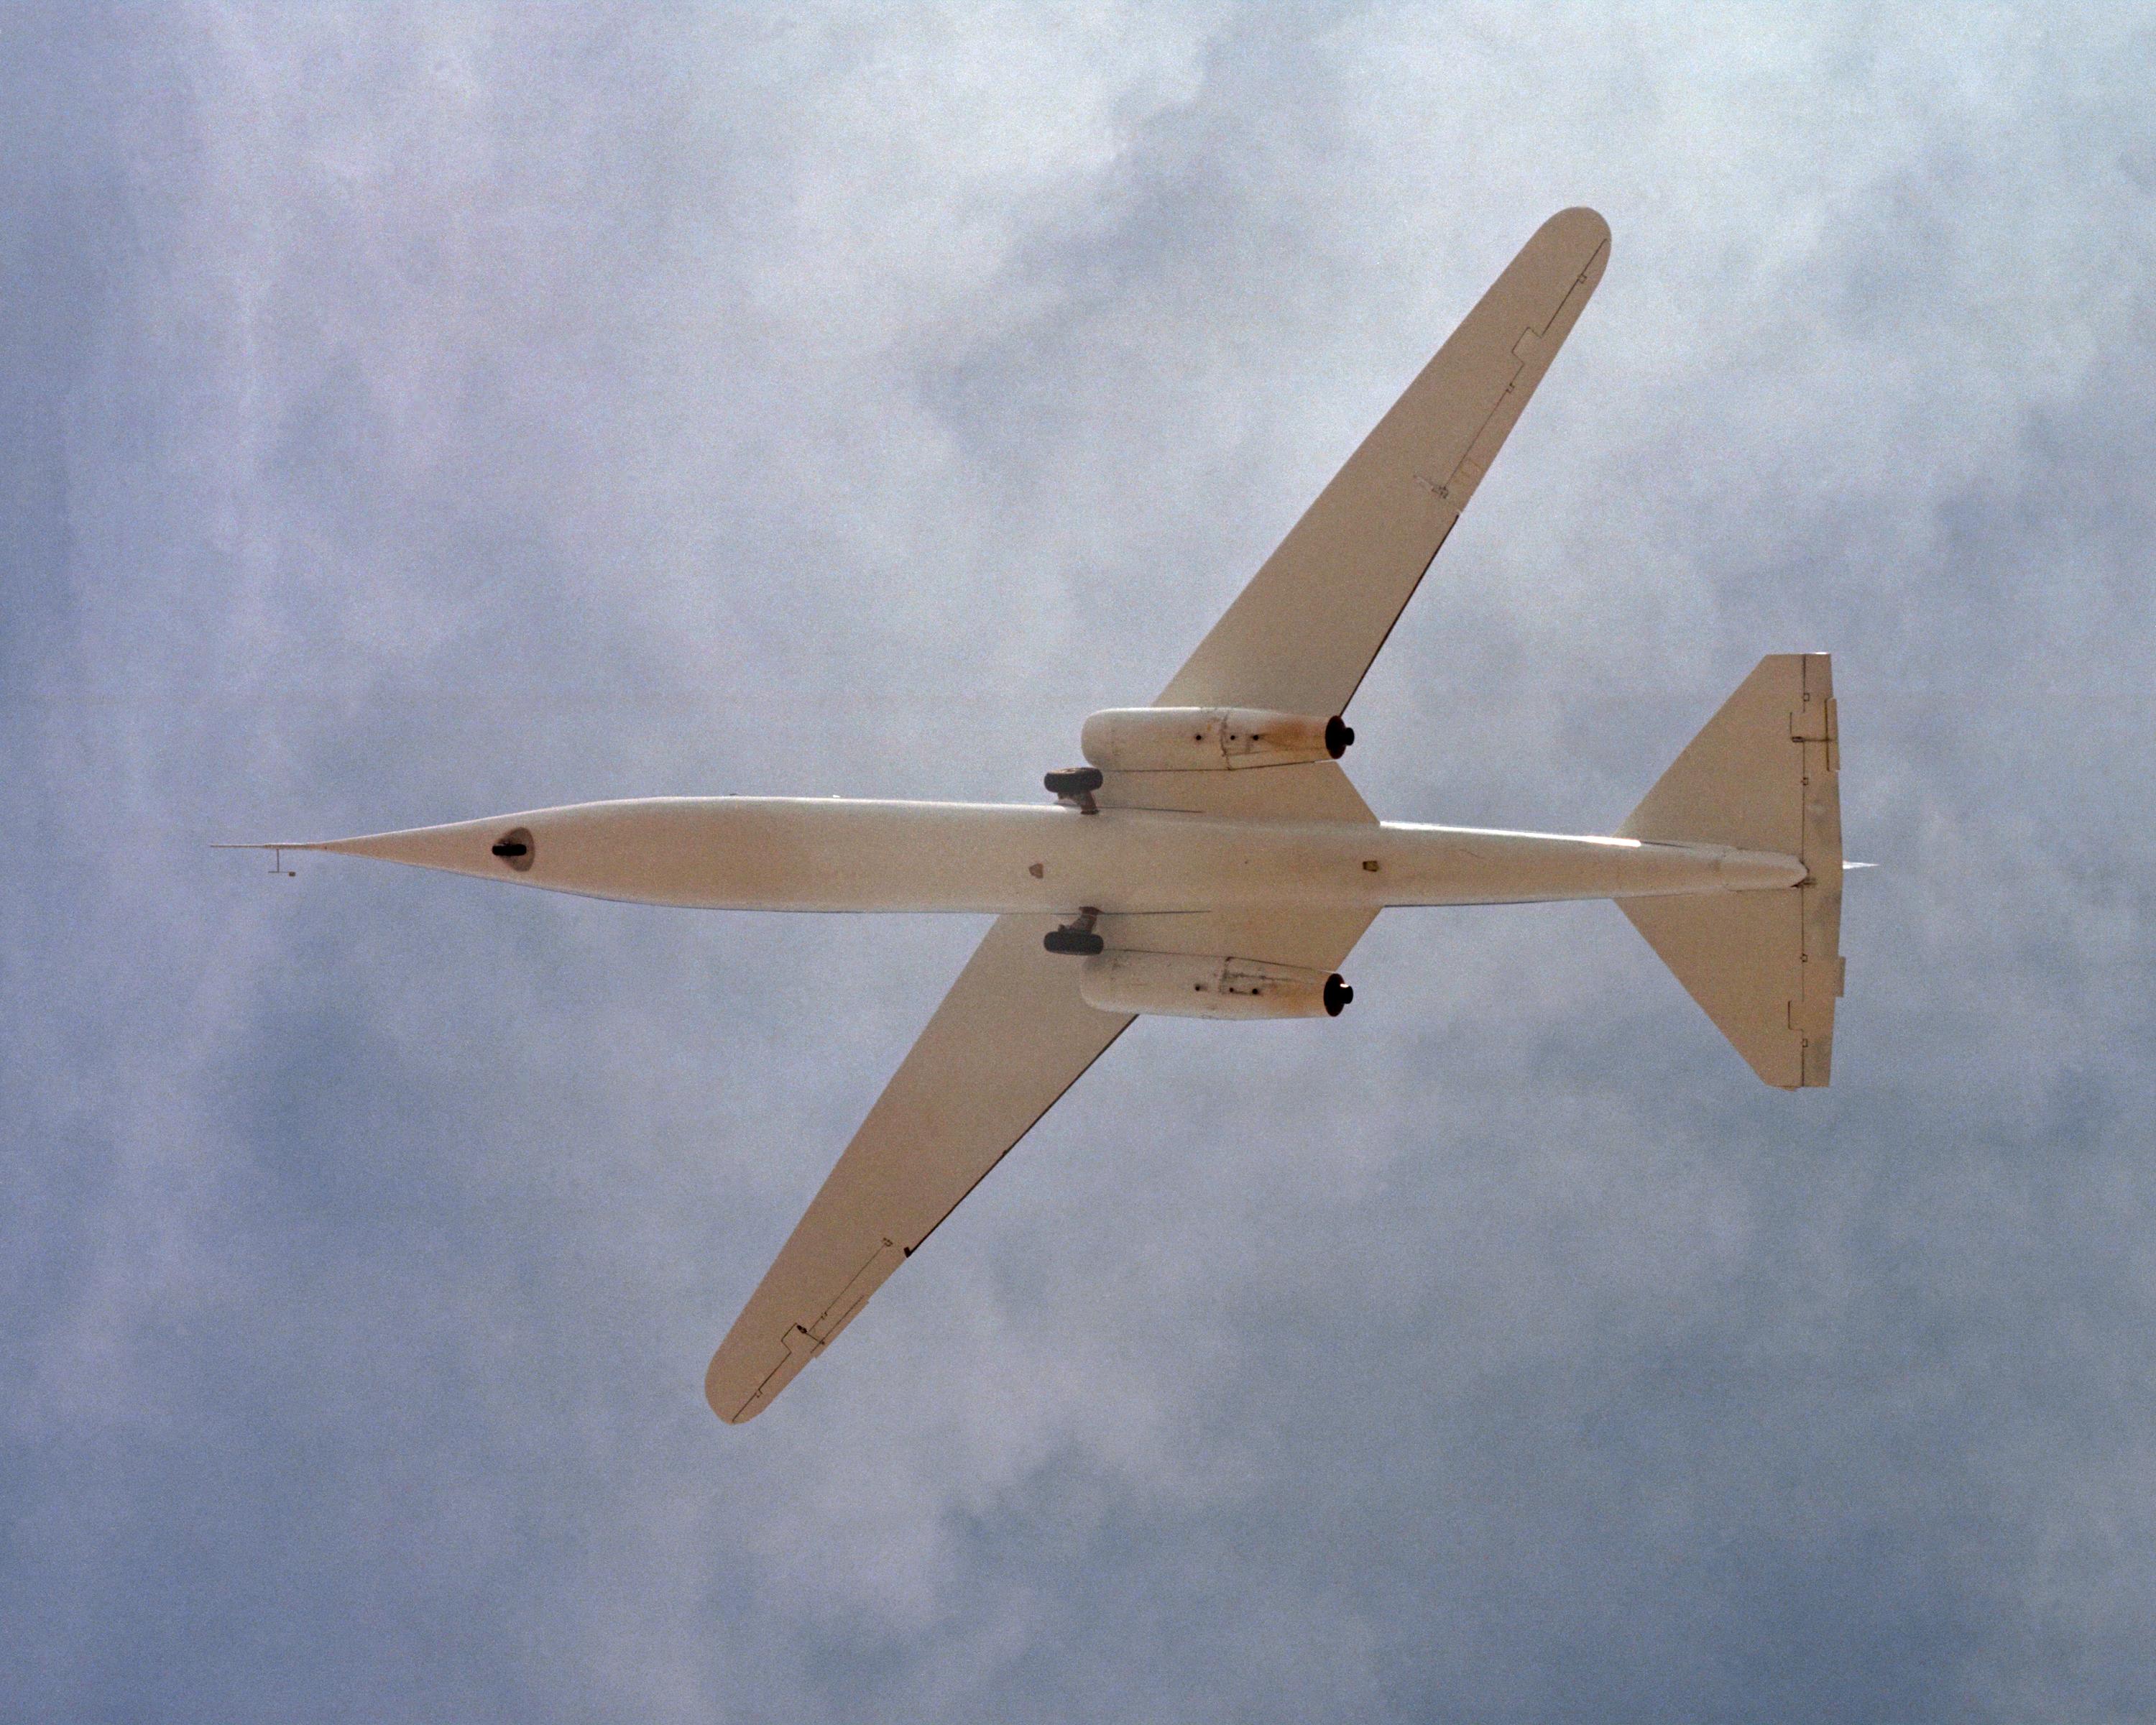 An oblique wing aircraft in flight.